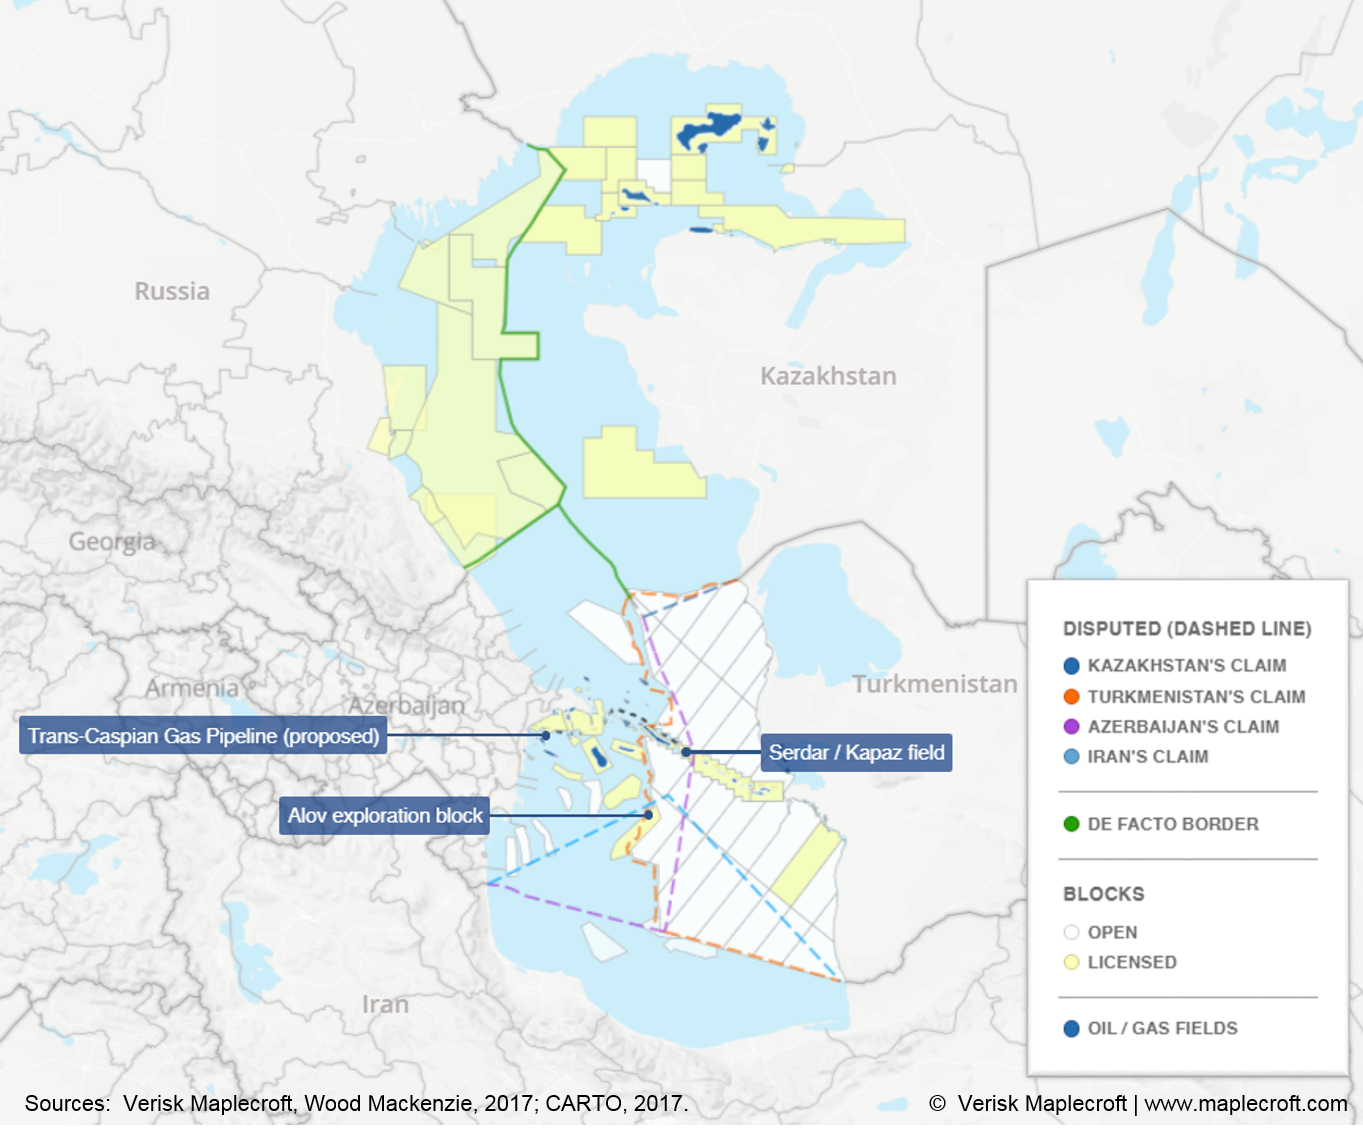 Territorial disputes in the Caspian are driven by unequal hydrocarbon distribution